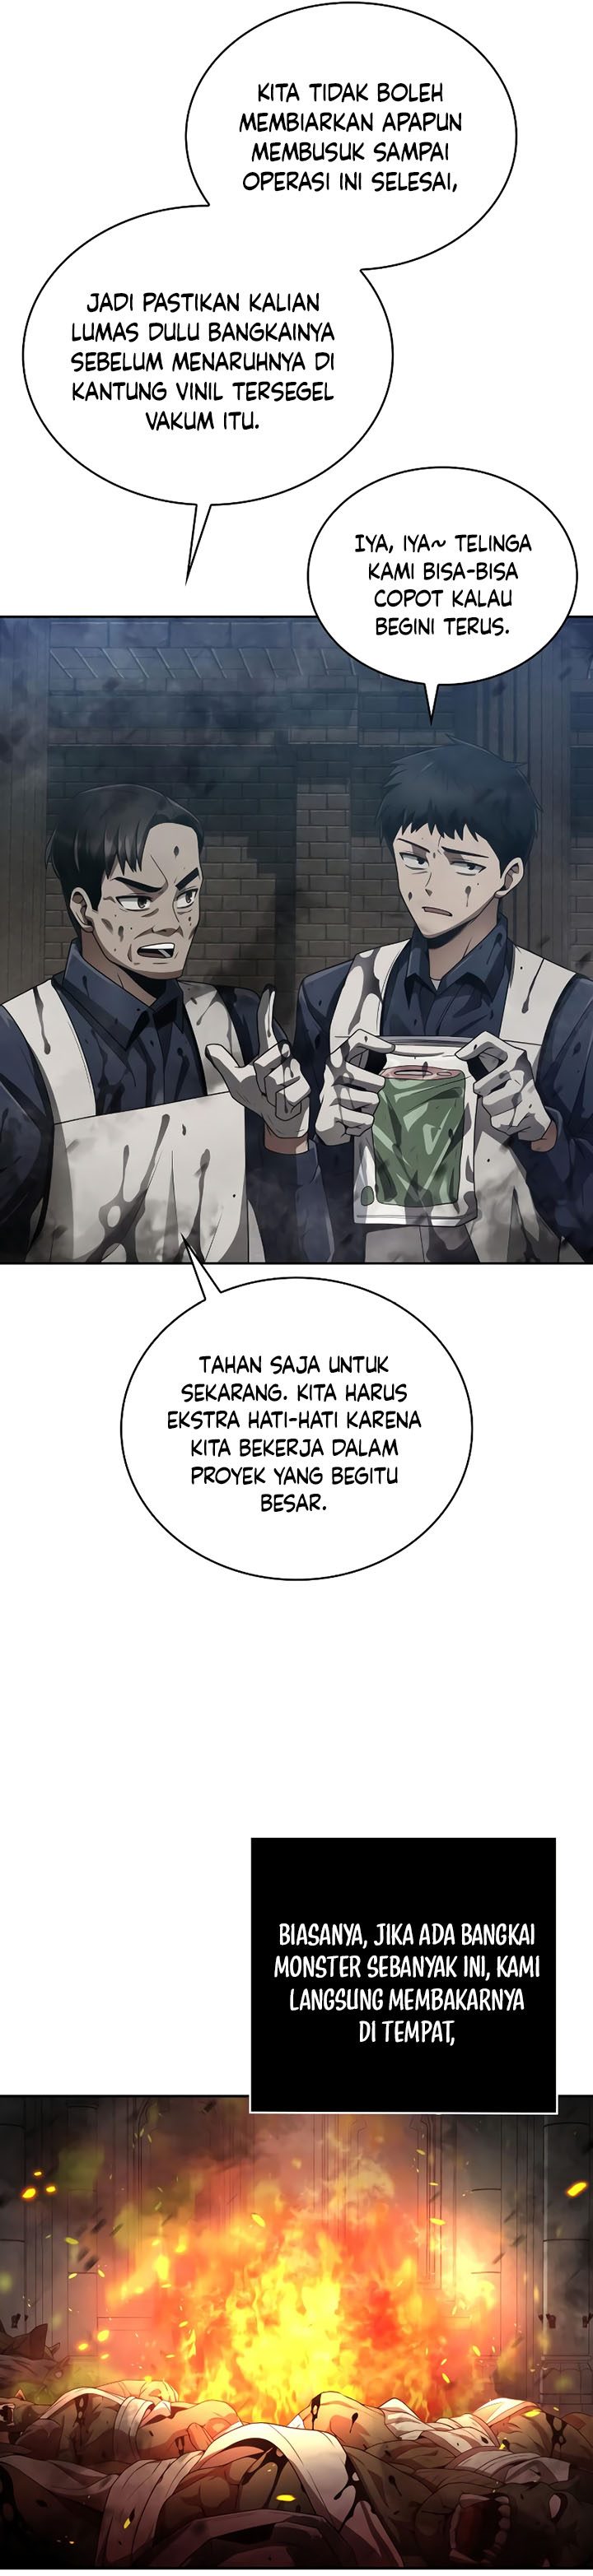 Dilarang COPAS - situs resmi www.mangacanblog.com - Komik clever cleaning life of the returned genius hunter 016 - chapter 16 17 Indonesia clever cleaning life of the returned genius hunter 016 - chapter 16 Terbaru 4|Baca Manga Komik Indonesia|Mangacan